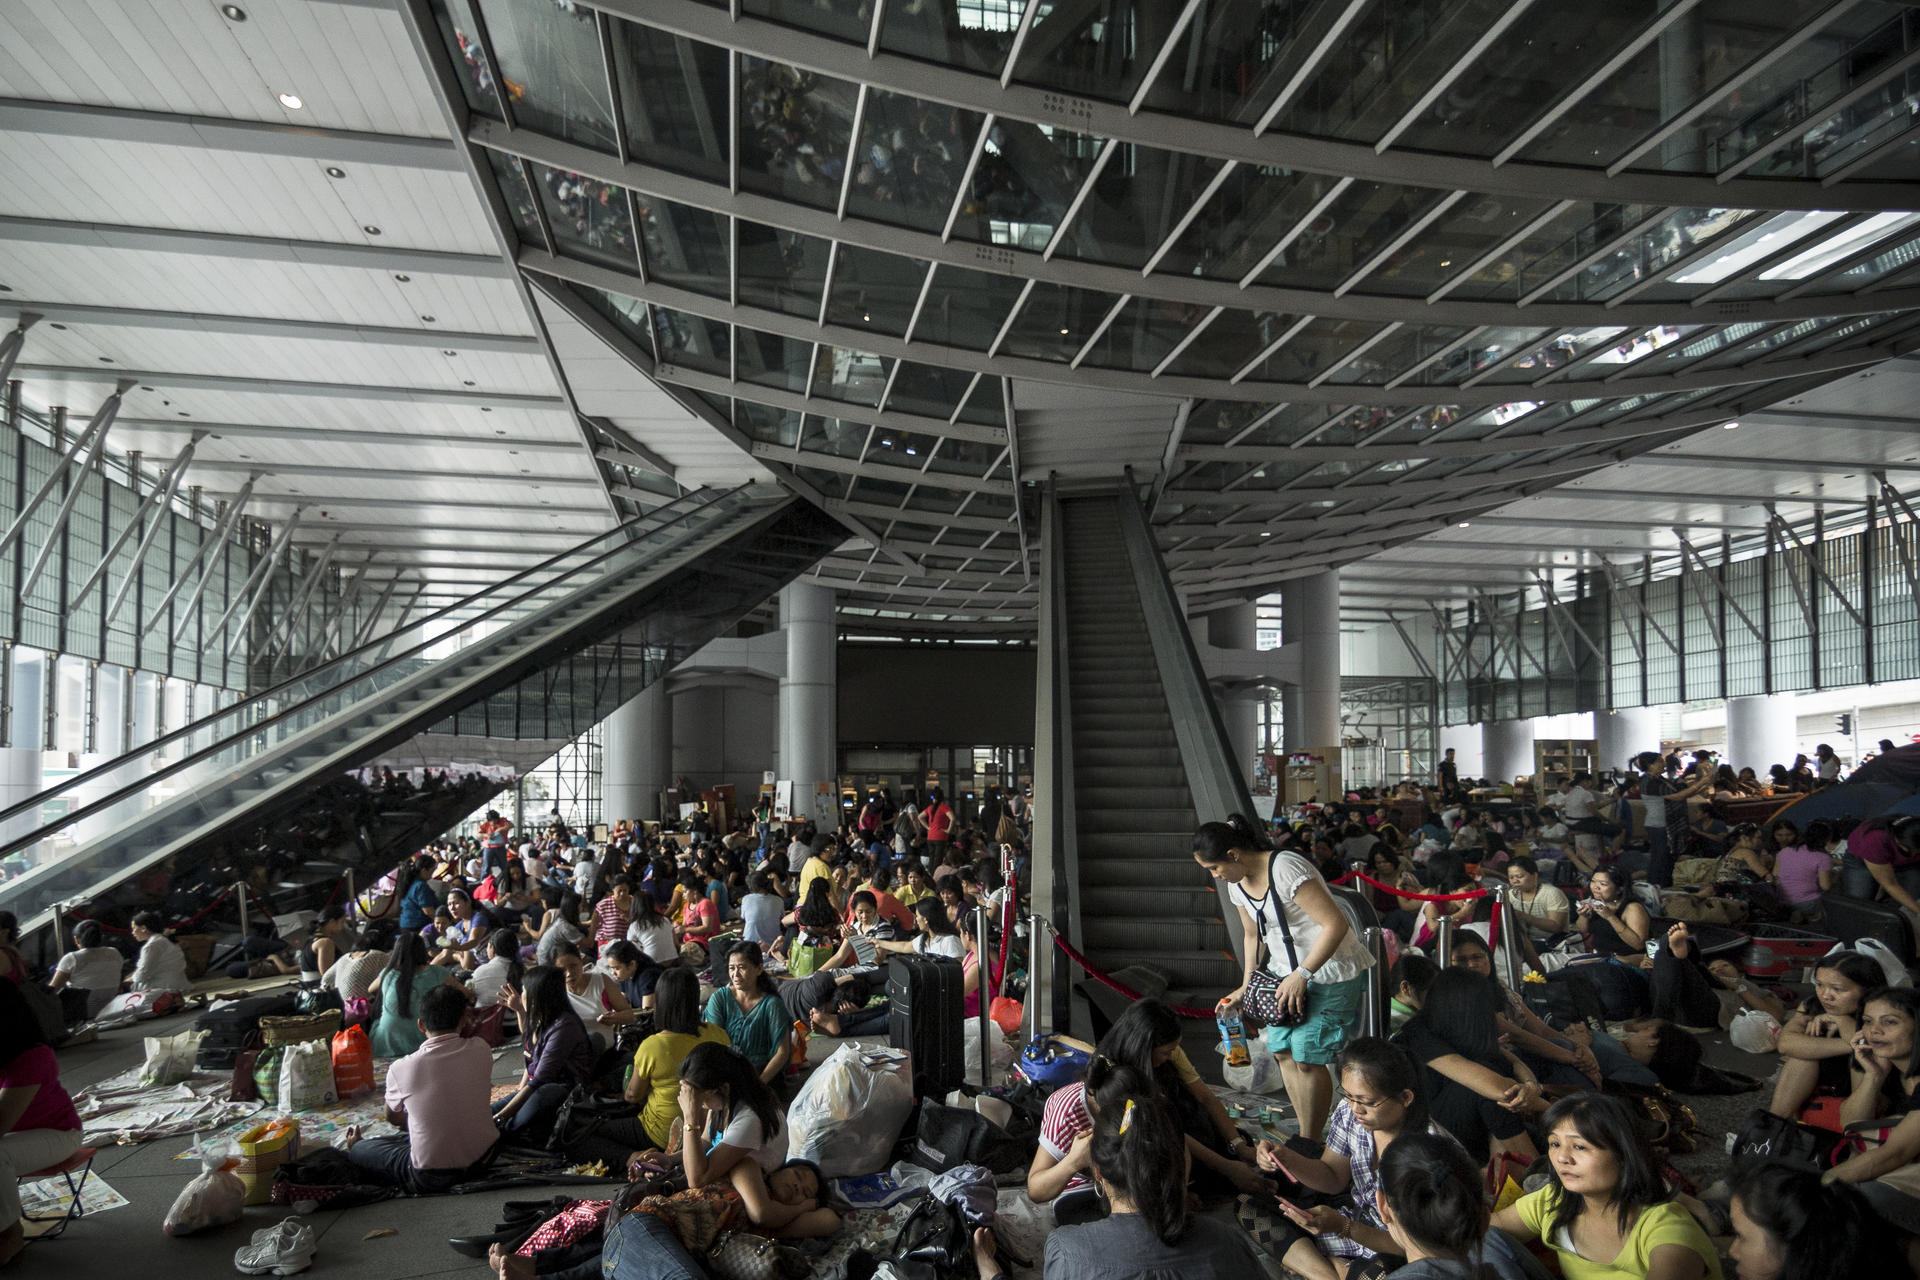 Domestic workers gather in Central on a Sunday, for many their only day off. The helpers are often excluded from protections given to other migrants.